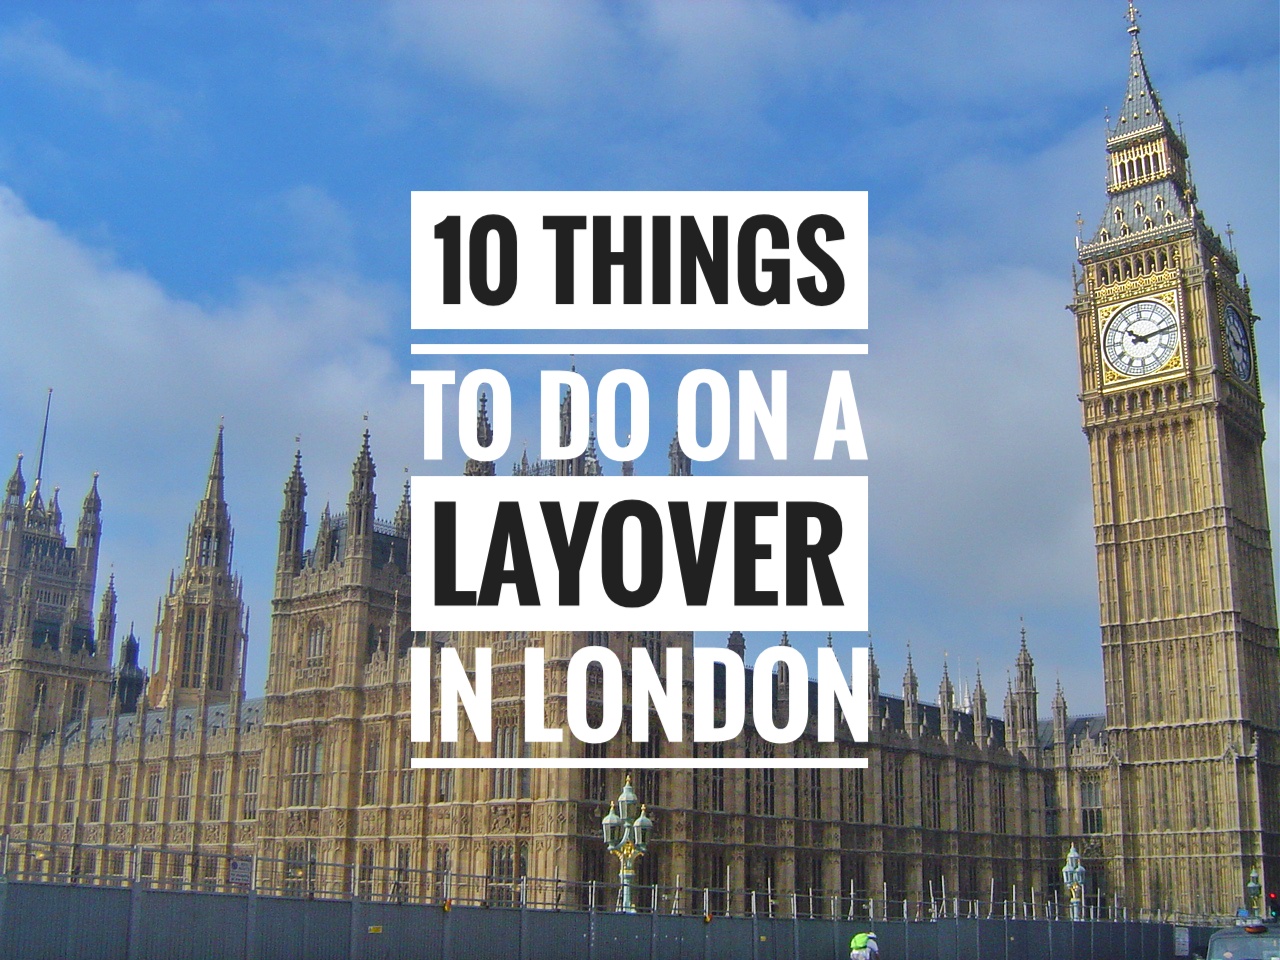 London is a huge city filled with many important Tourist Attractions, but what happens if you only have a short layover and want to see the city? Here are 10 Treasures Of Traveling and things to do on a short layover in London.